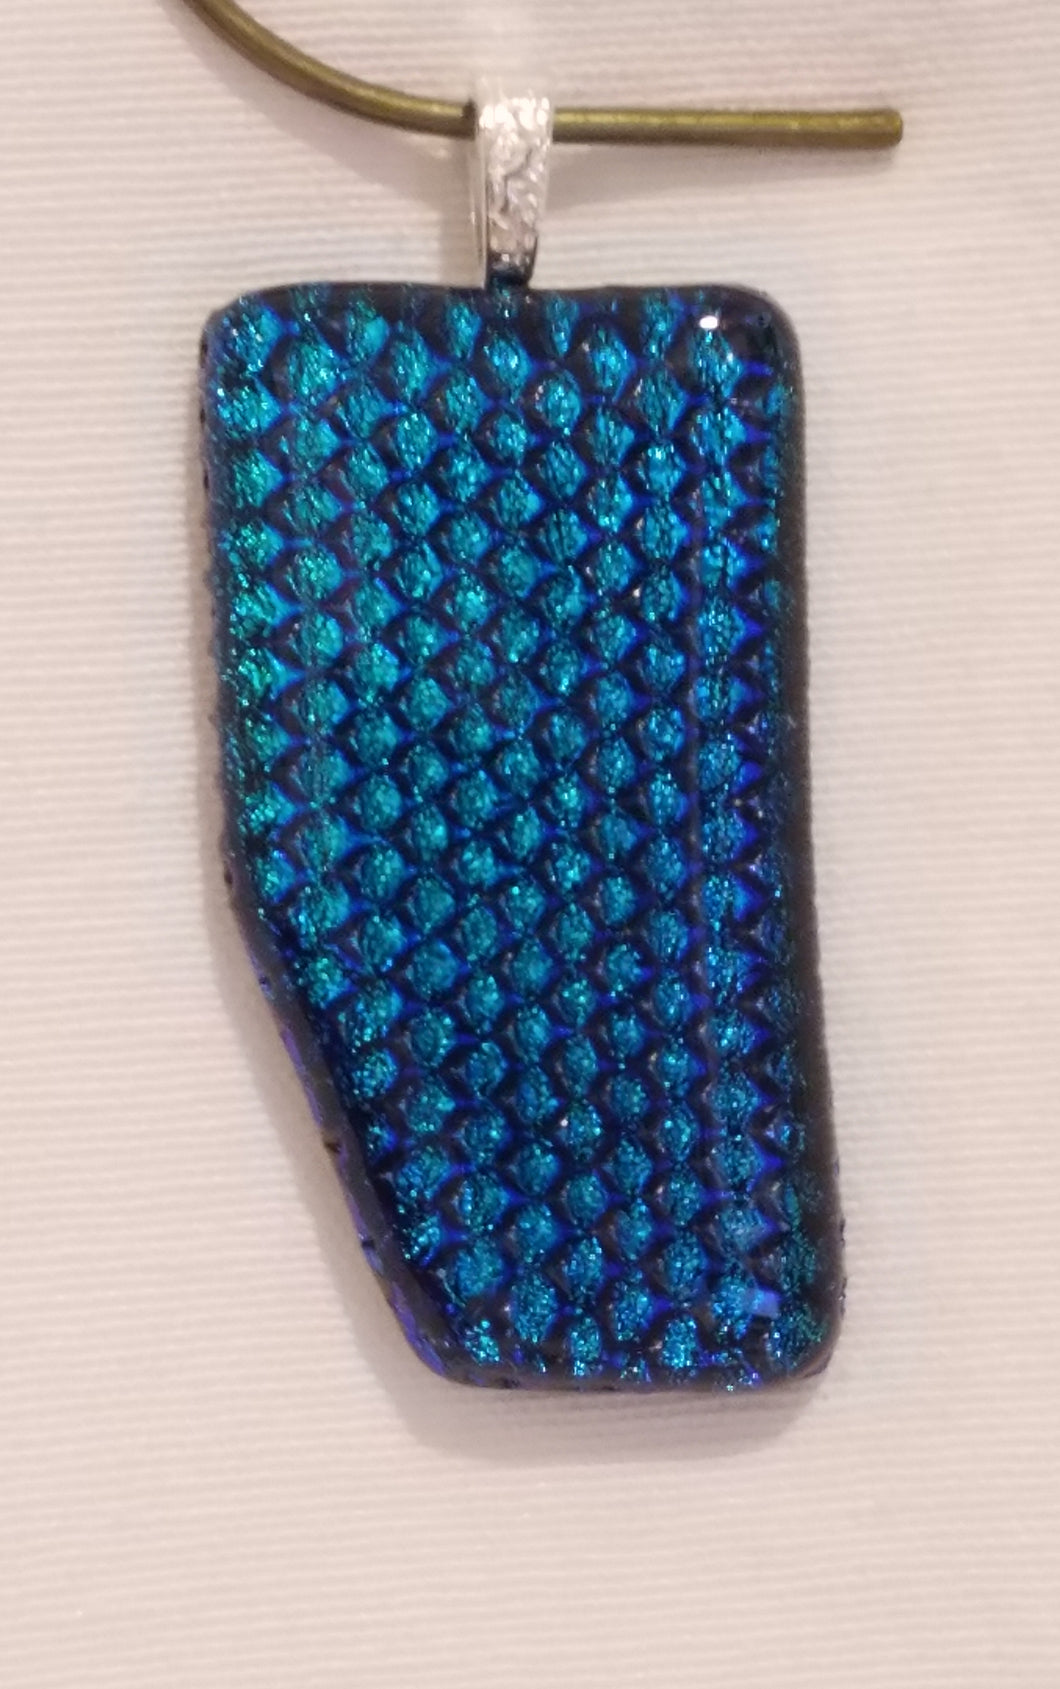 This pendant is a heavily texture, but capped dichroic which leans towards the blue spectrum of teal.